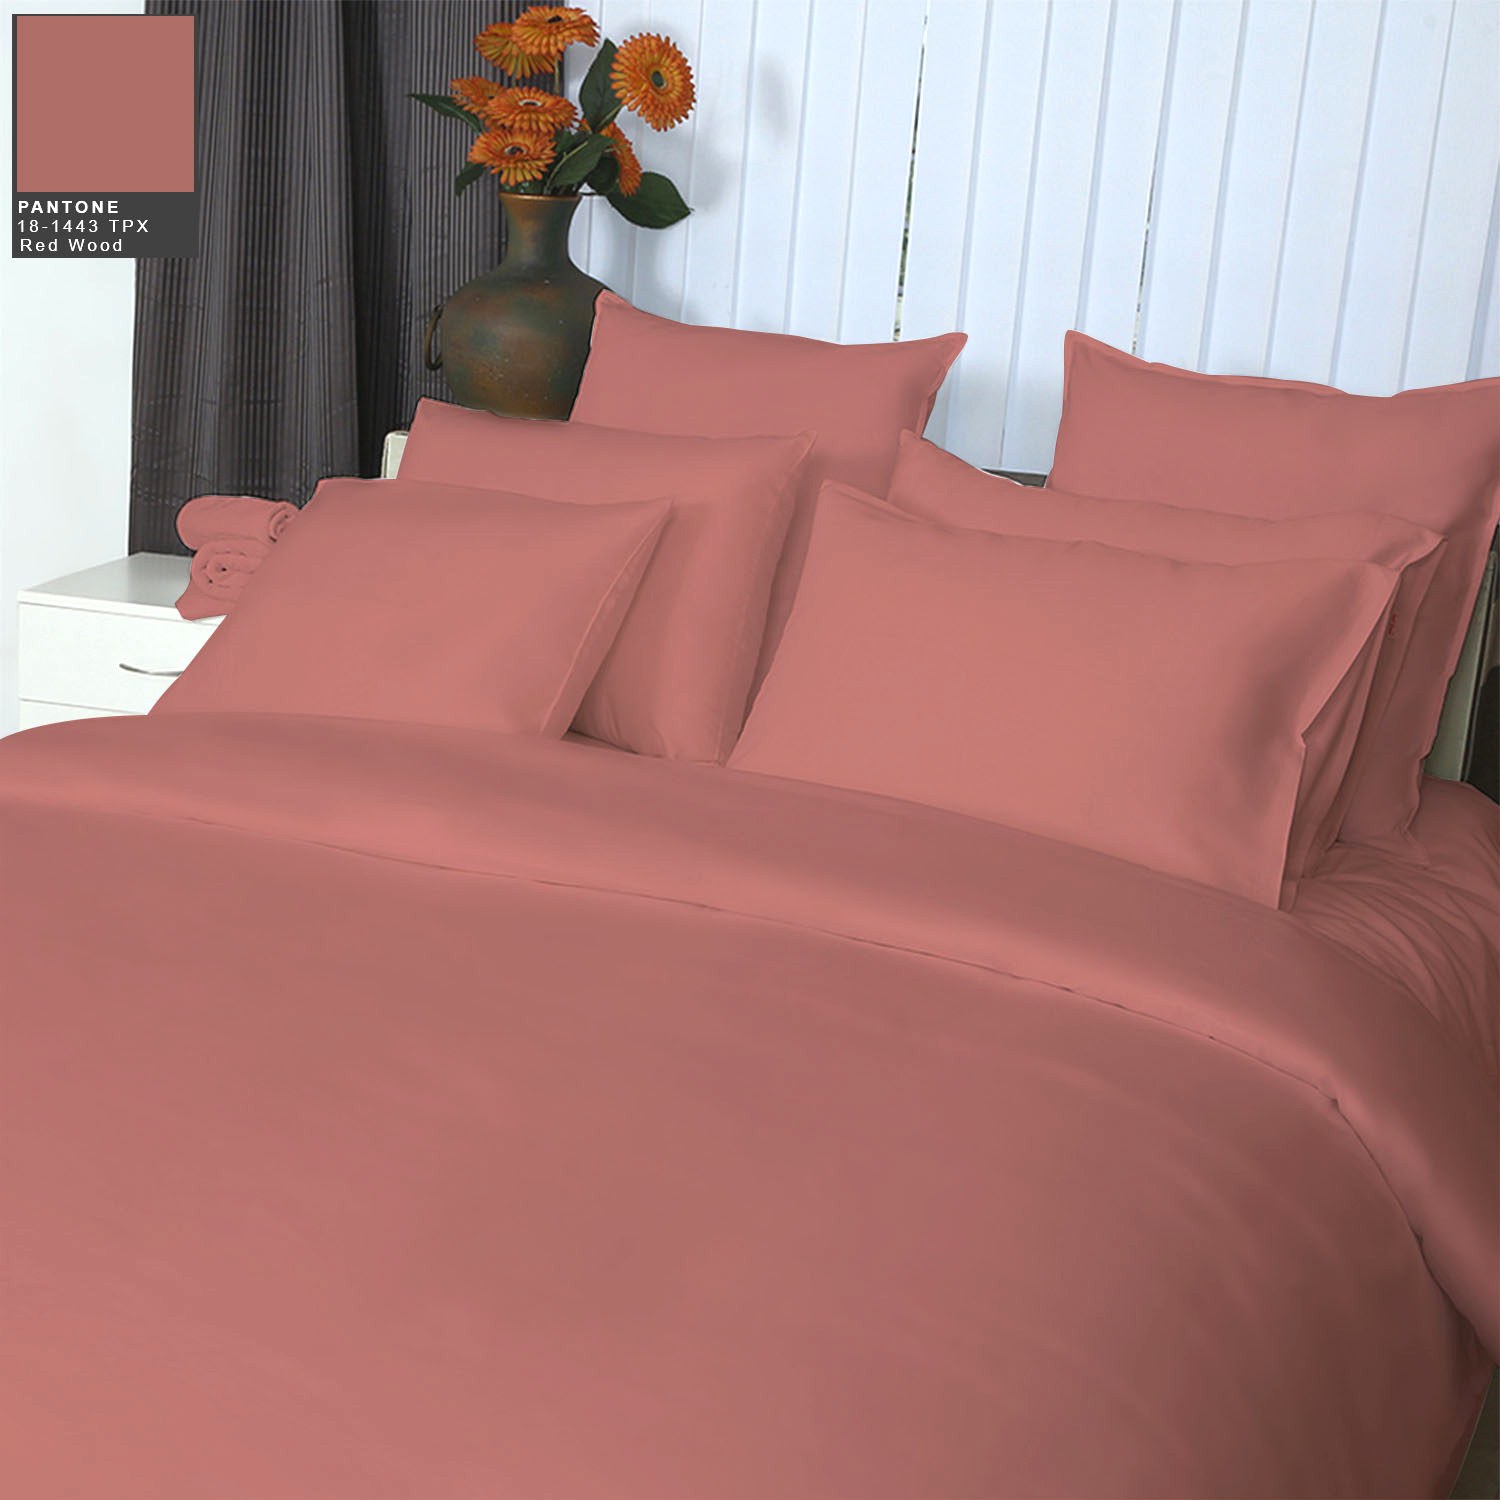 Details about   Scala Bedding Collection 1000TC Egyptian Cotton Select Solid Color Olympic Queen